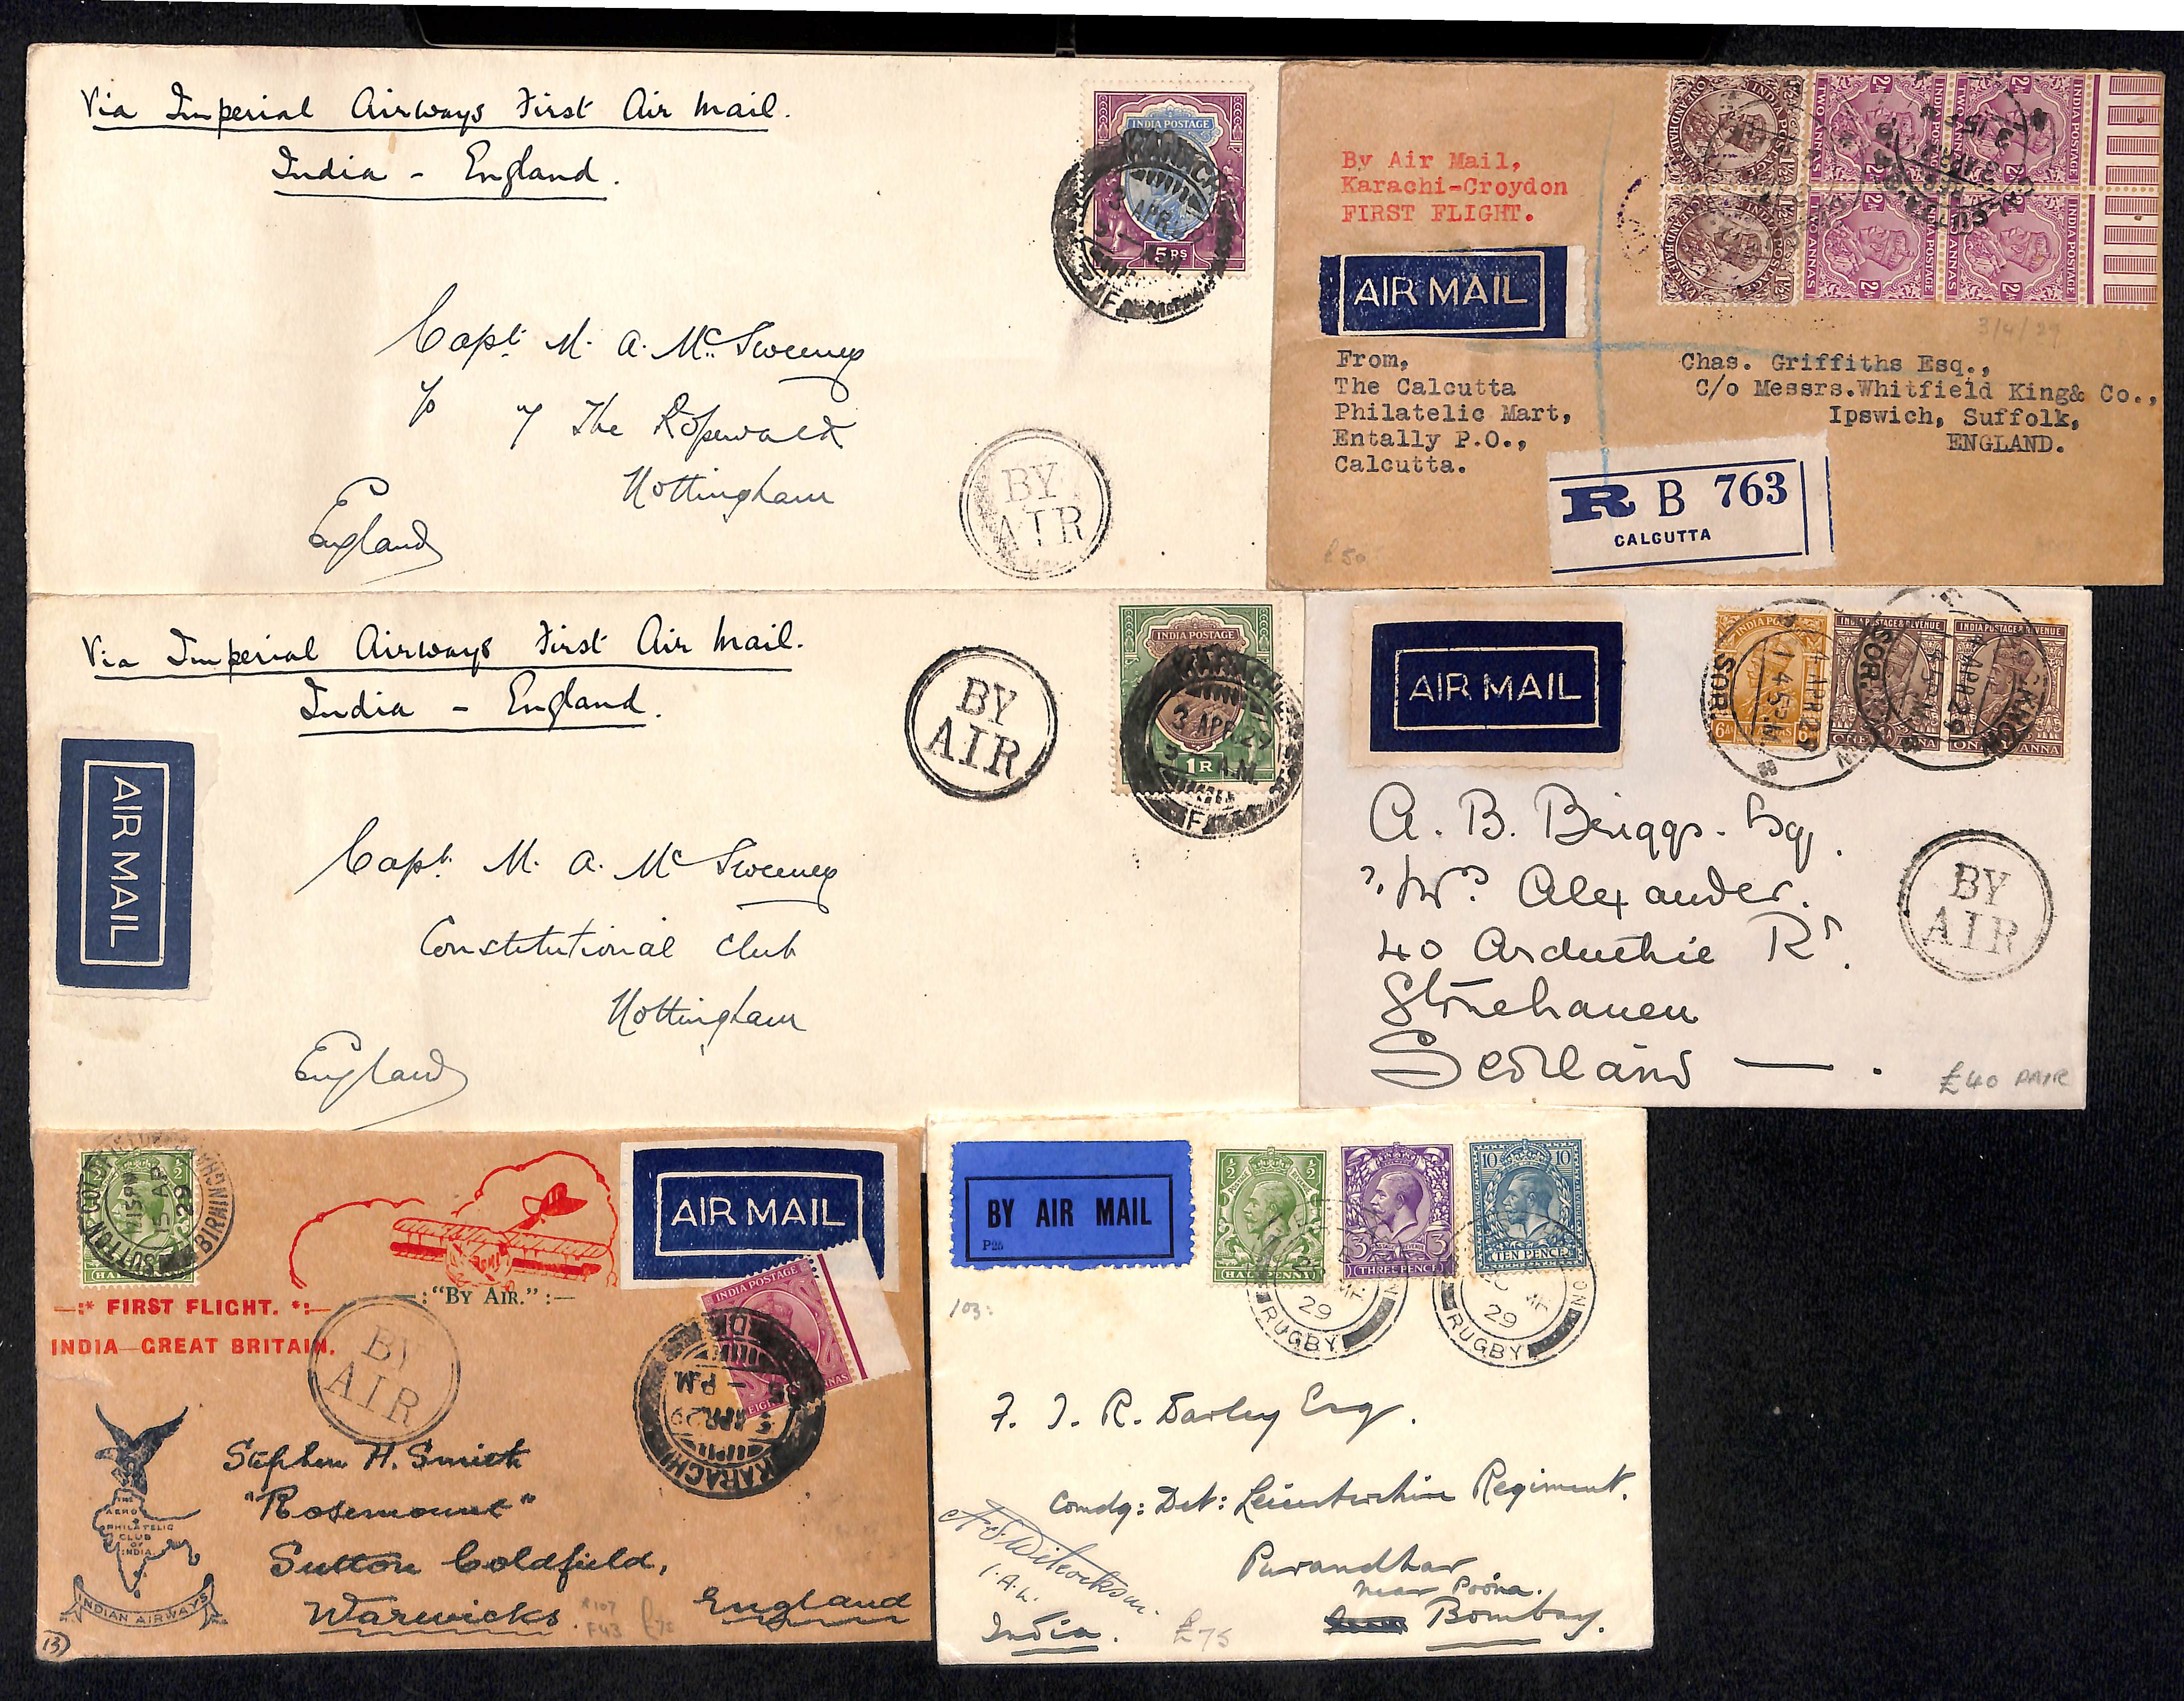 1929 (Mar 30/Apr 7) Cover from England to Bombay, carried on the Imperial Airways first flight to